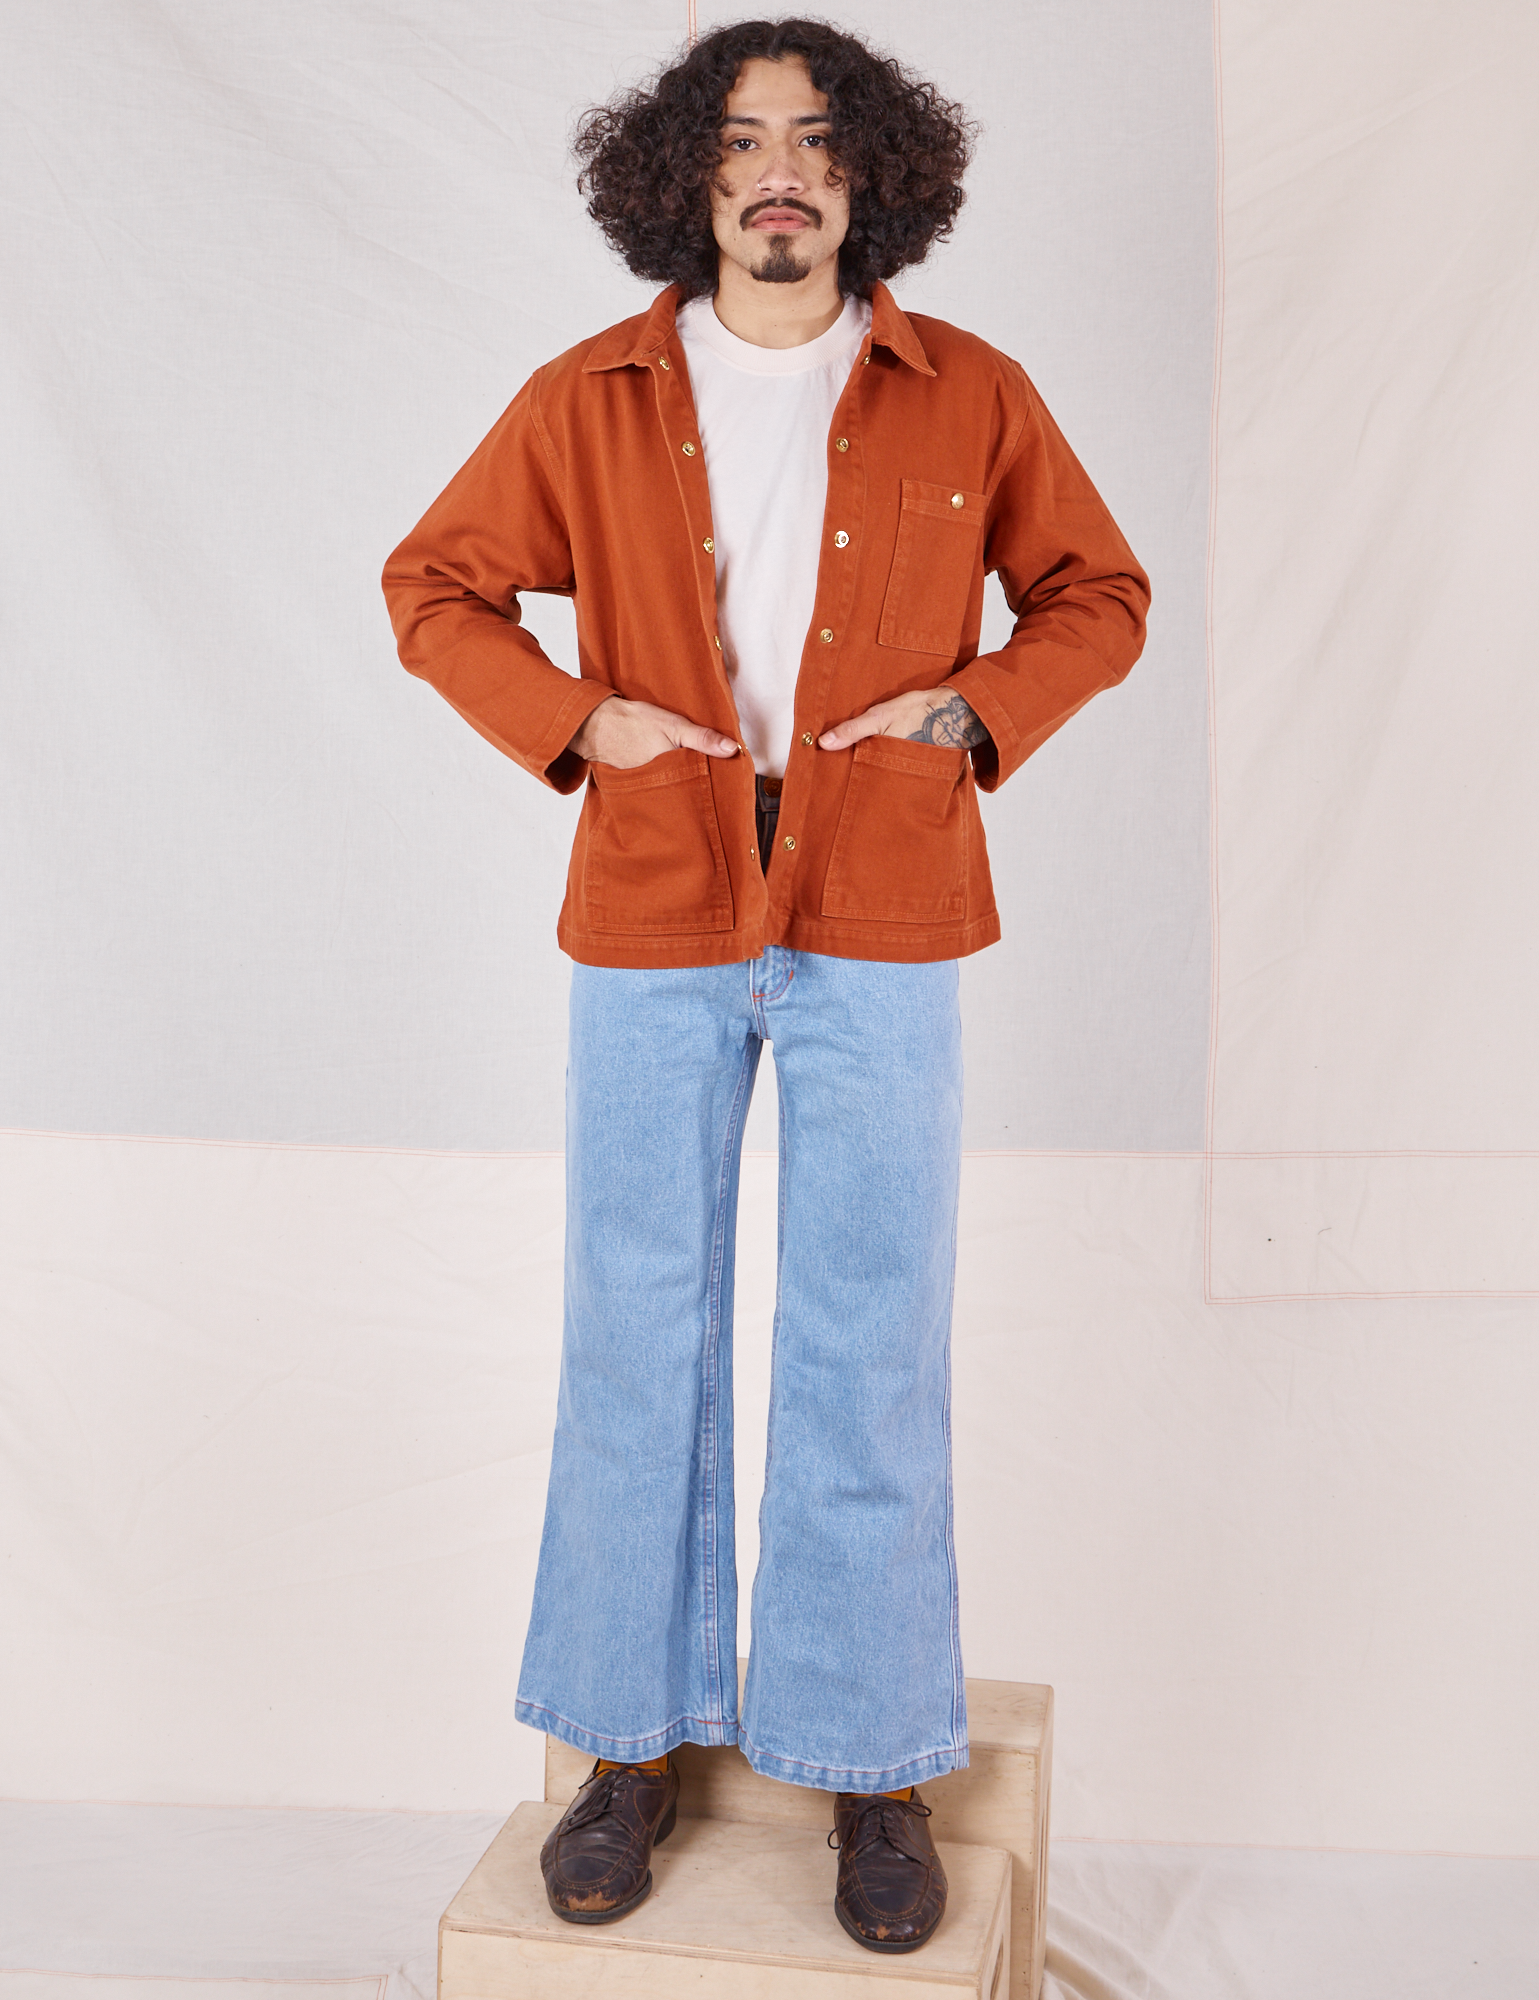 Jesse is wearing Denim Work Jacket in Burnt Terracotta paired with light wash Sailor Jeans